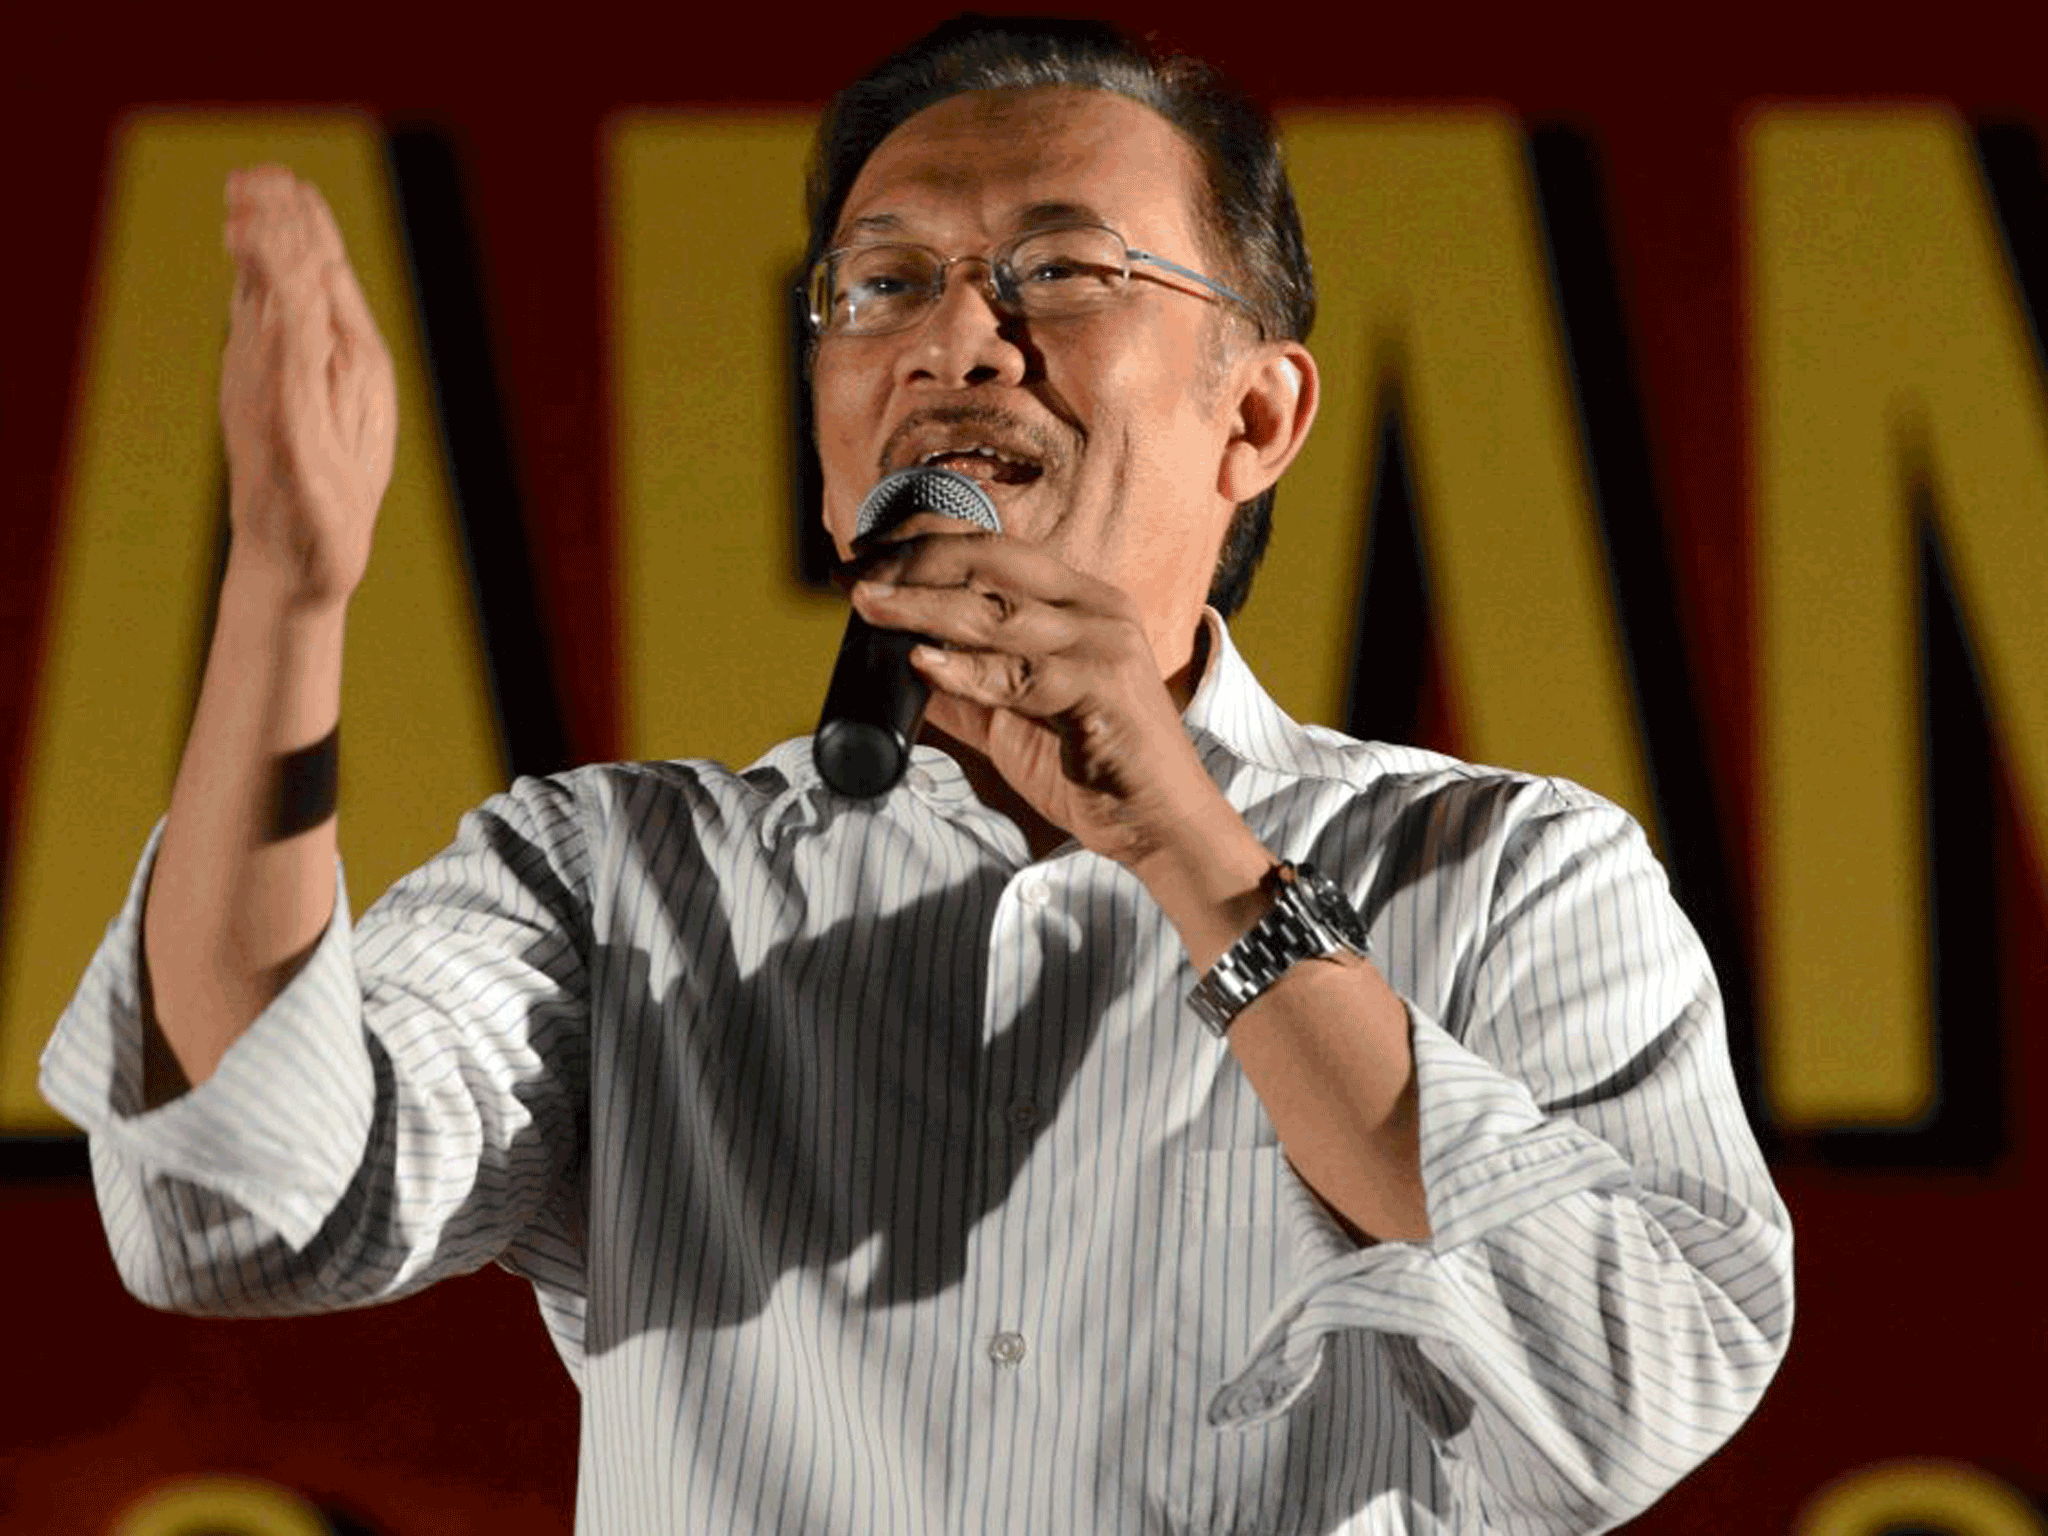 The Opposition People’s Alliance, led by Anwar Ibrahim, failed to secure enough votes to depose the coalition